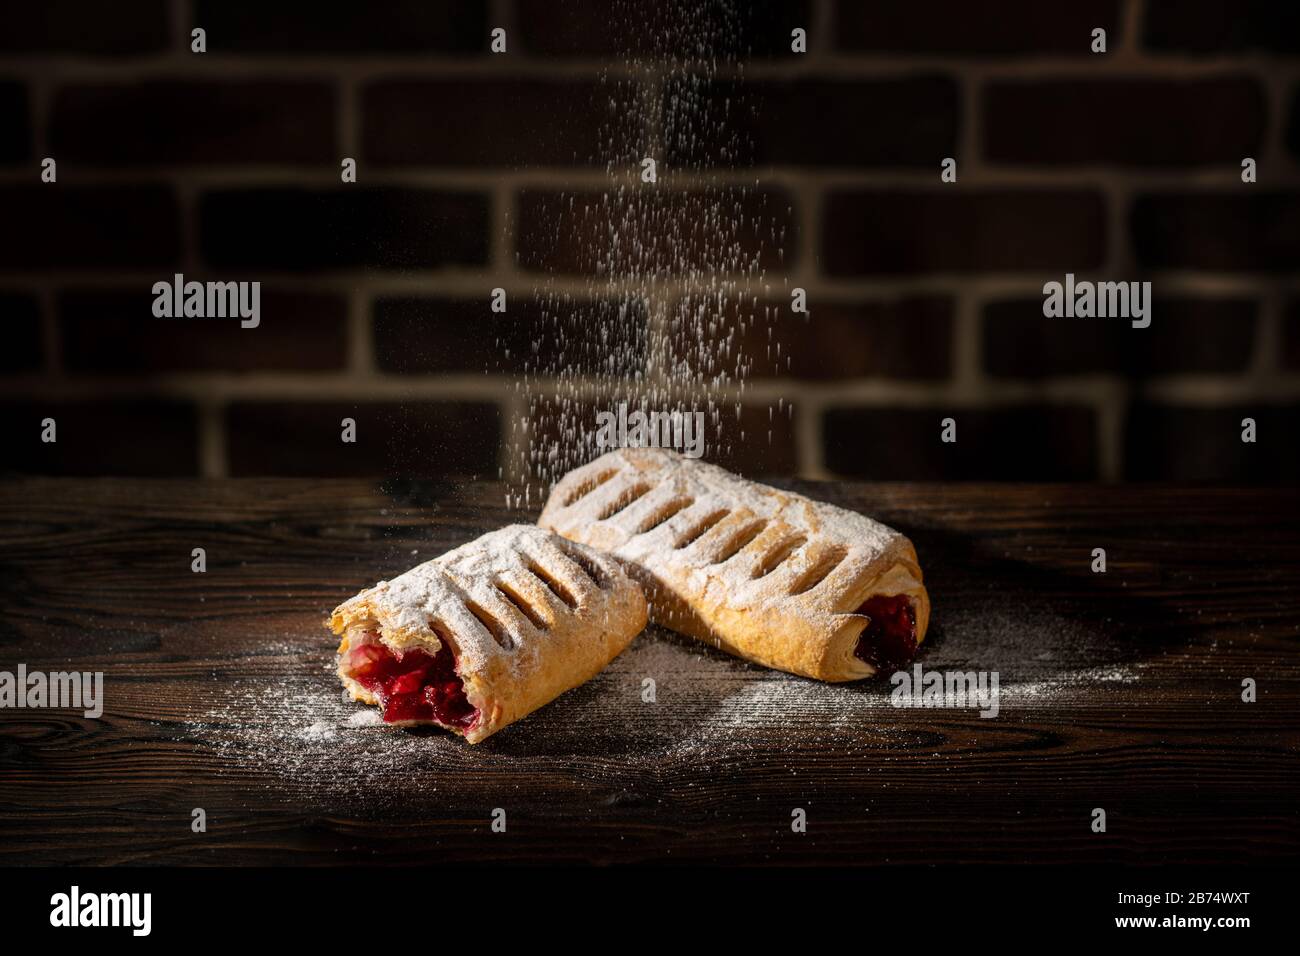 Strudel with cherries powdered with sugar on a wooden table and brick background Stock Photo